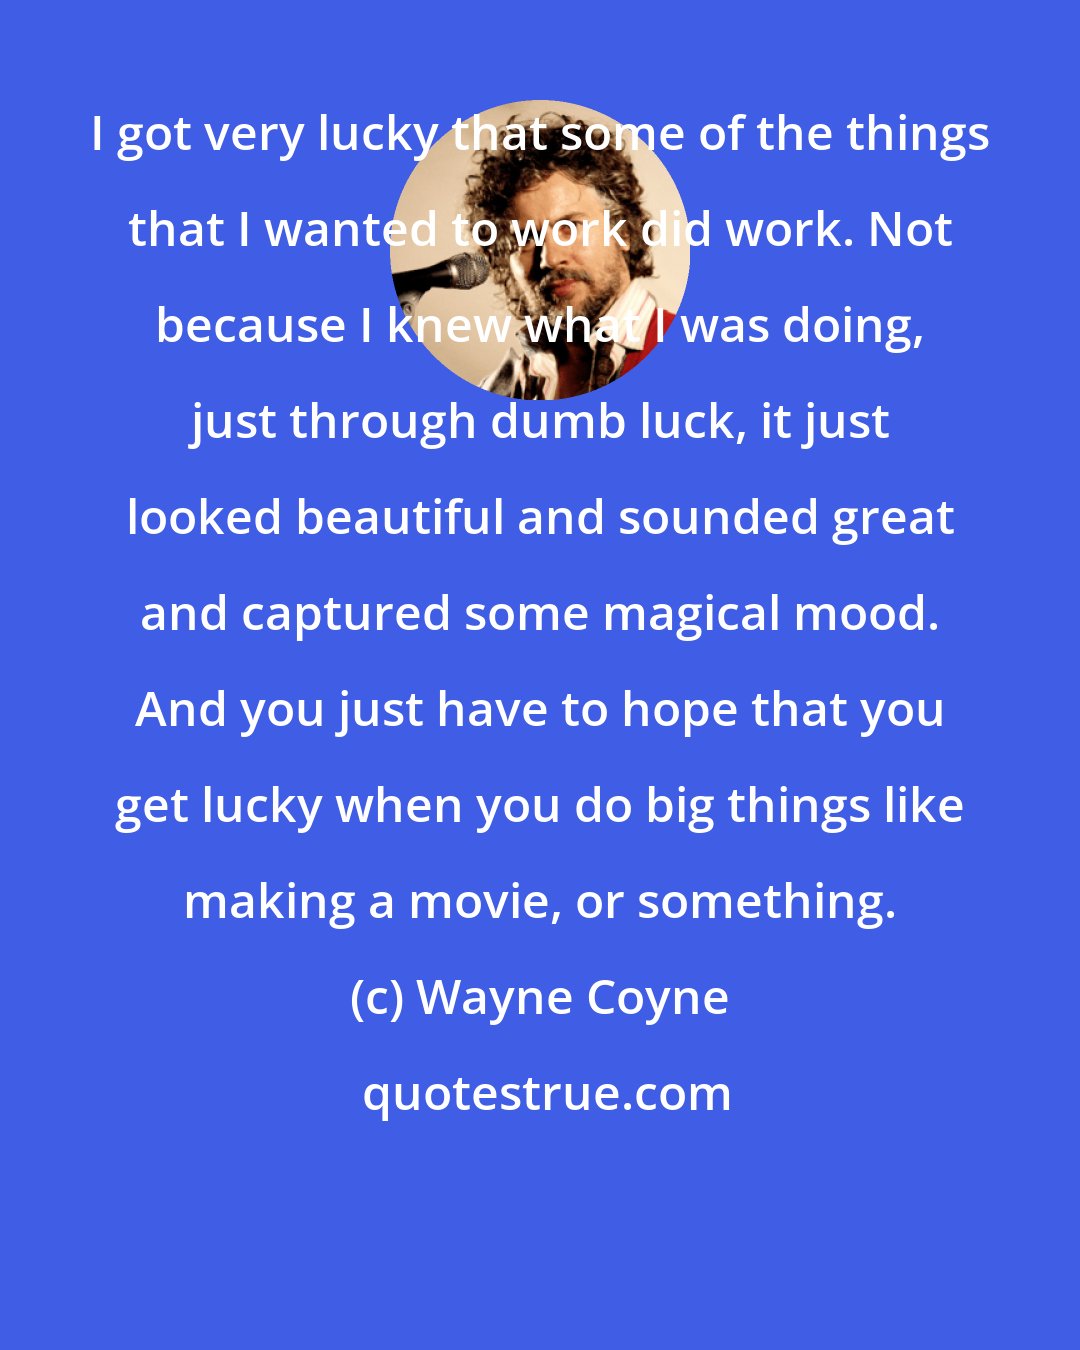 Wayne Coyne: I got very lucky that some of the things that I wanted to work did work. Not because I knew what I was doing, just through dumb luck, it just looked beautiful and sounded great and captured some magical mood. And you just have to hope that you get lucky when you do big things like making a movie, or something.